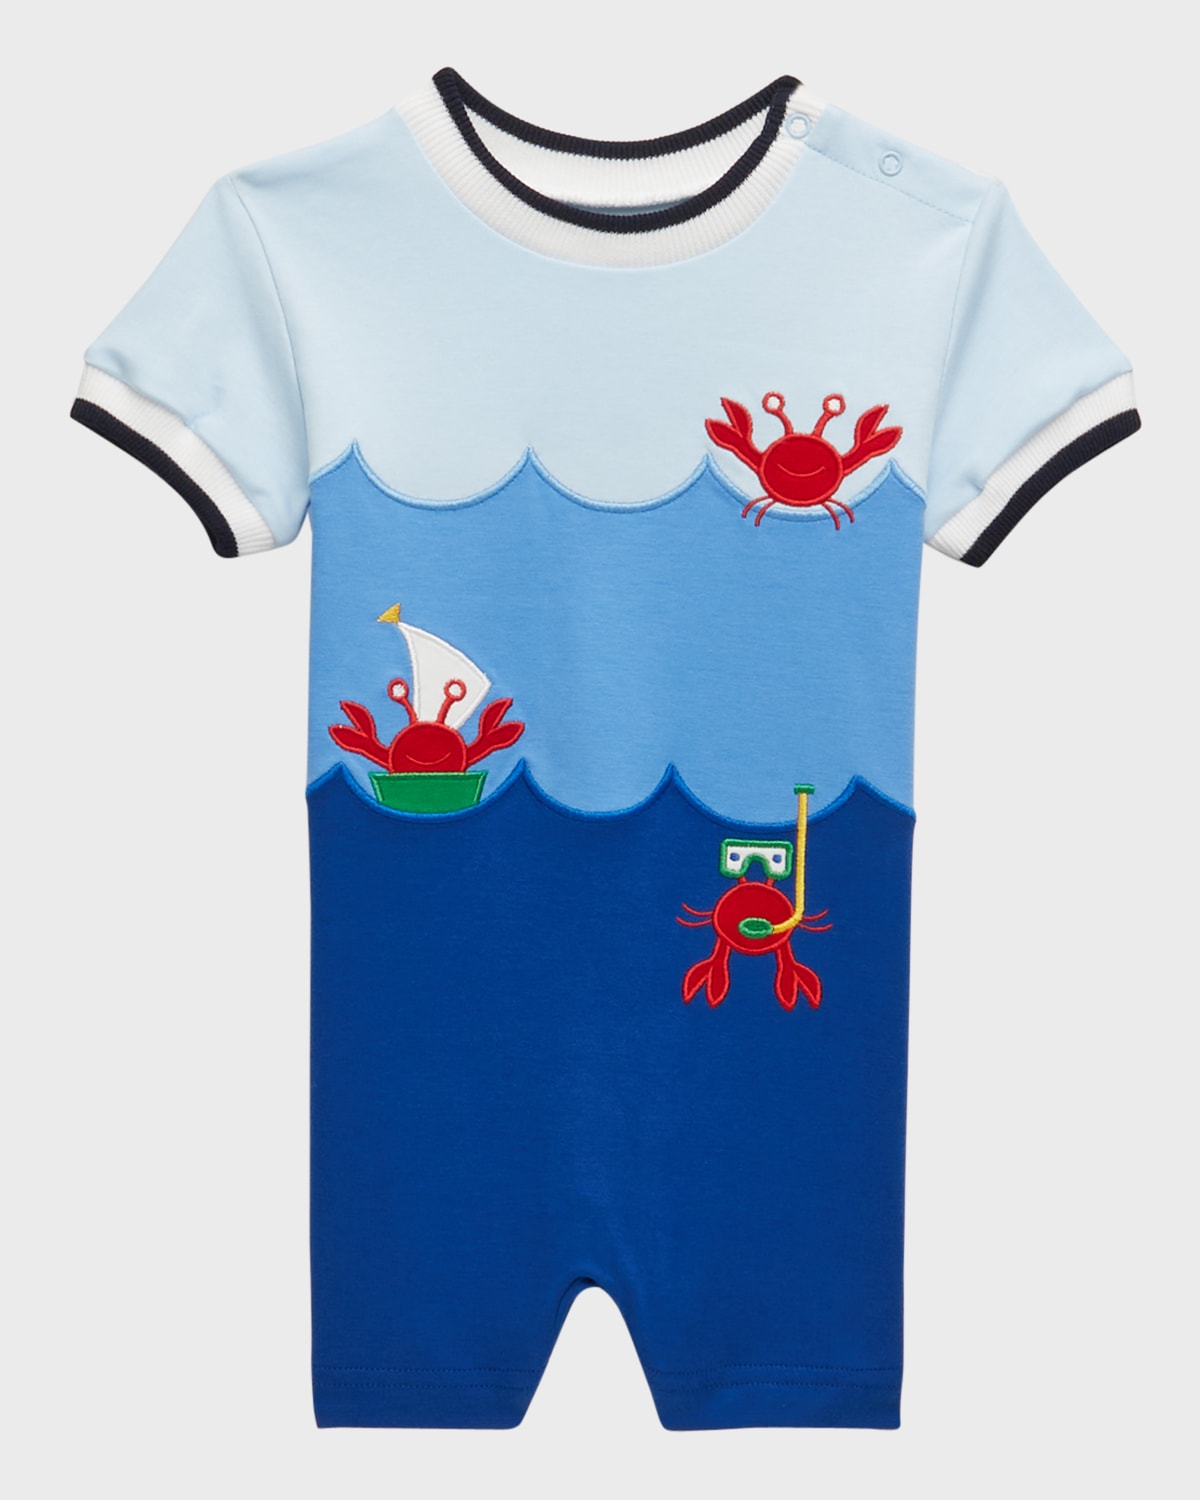 Boy's Knit Embroidered Crabs Shortall, Size 3M-24M